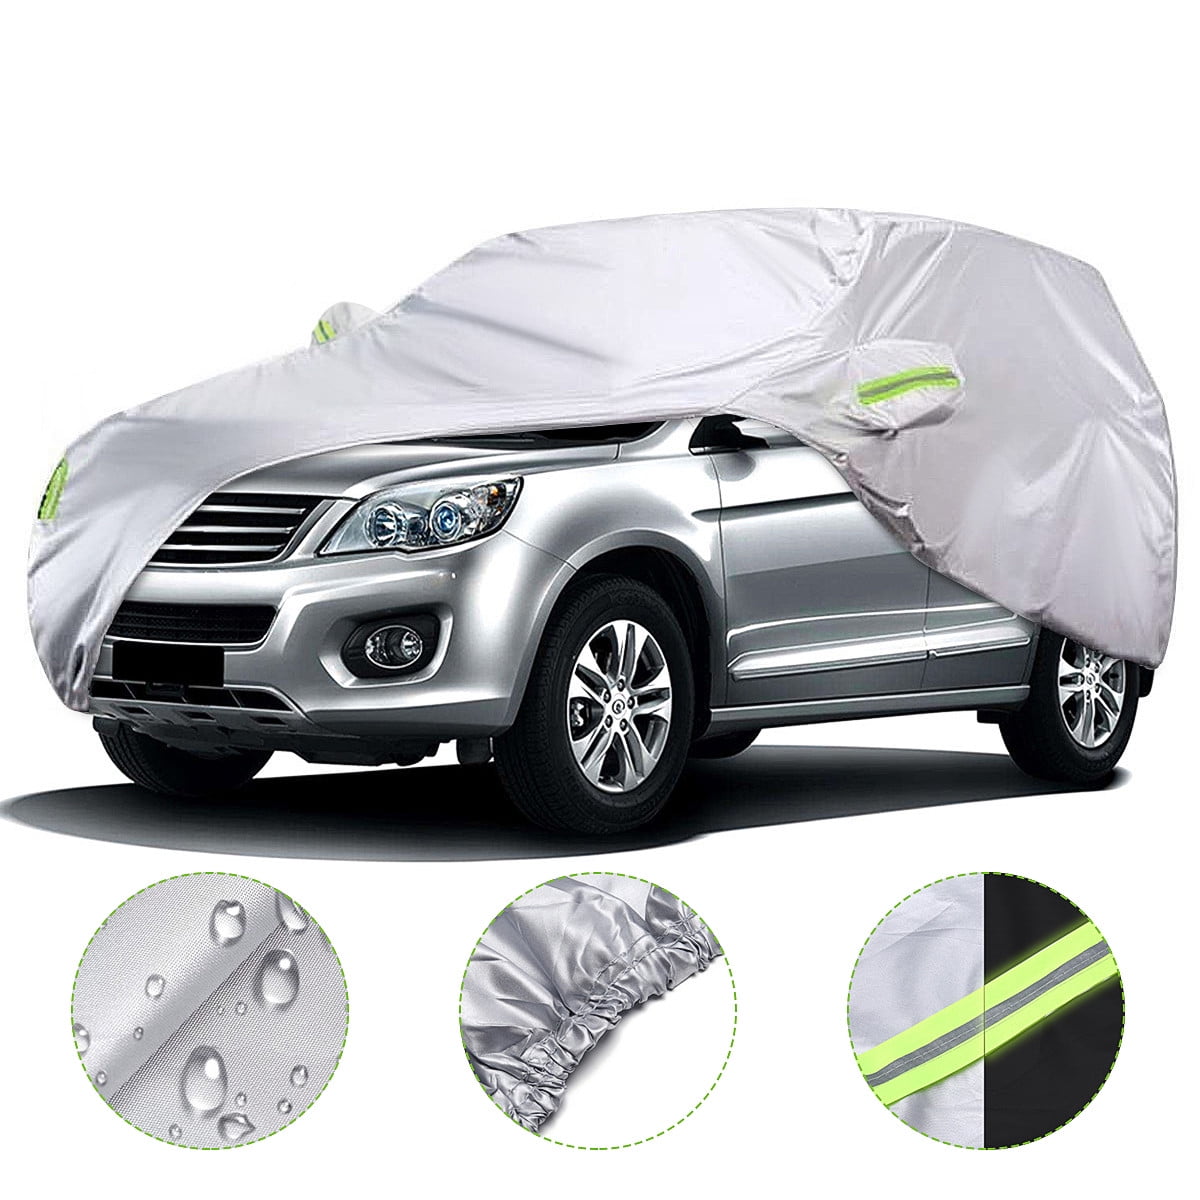 Sailnovo Truck Car Cover All Weather Waterproof UV Protection Windproof  Outdoor Indoor Full Car Cover, Universal Fit for Truck Length Up to 250